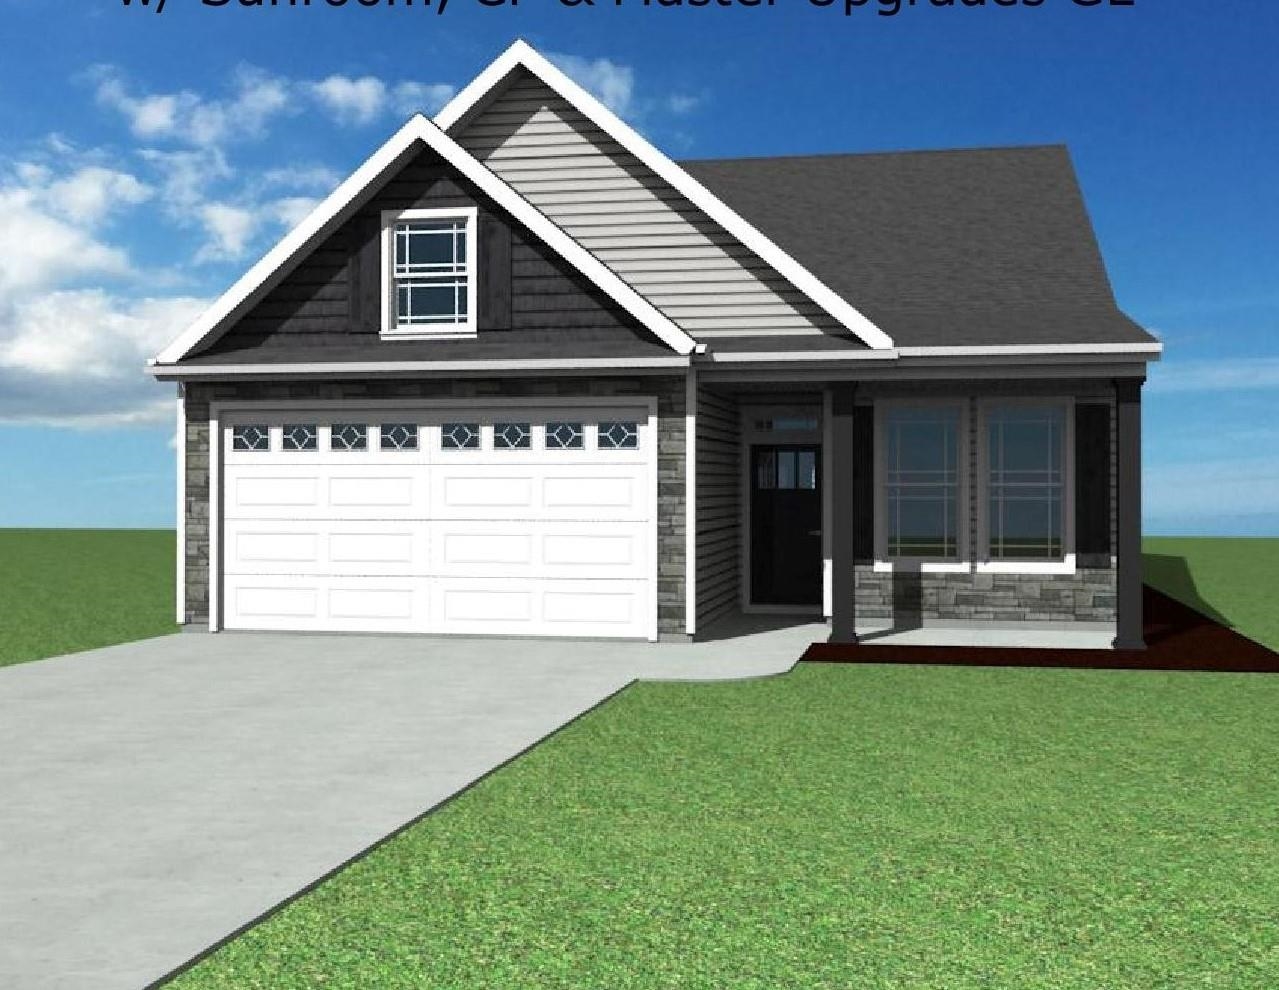 This is the BISHOP floorplan with 3 bedrooms, 2 bathrooms, office/study, walk in laundry. This home will also feature a 12x12 sunroom and full unfinished basement. Standard features to this home and the community include Crown Molding with Rope Lighting, Trey ceiling in Master Bedroom, Gas Fireplace.